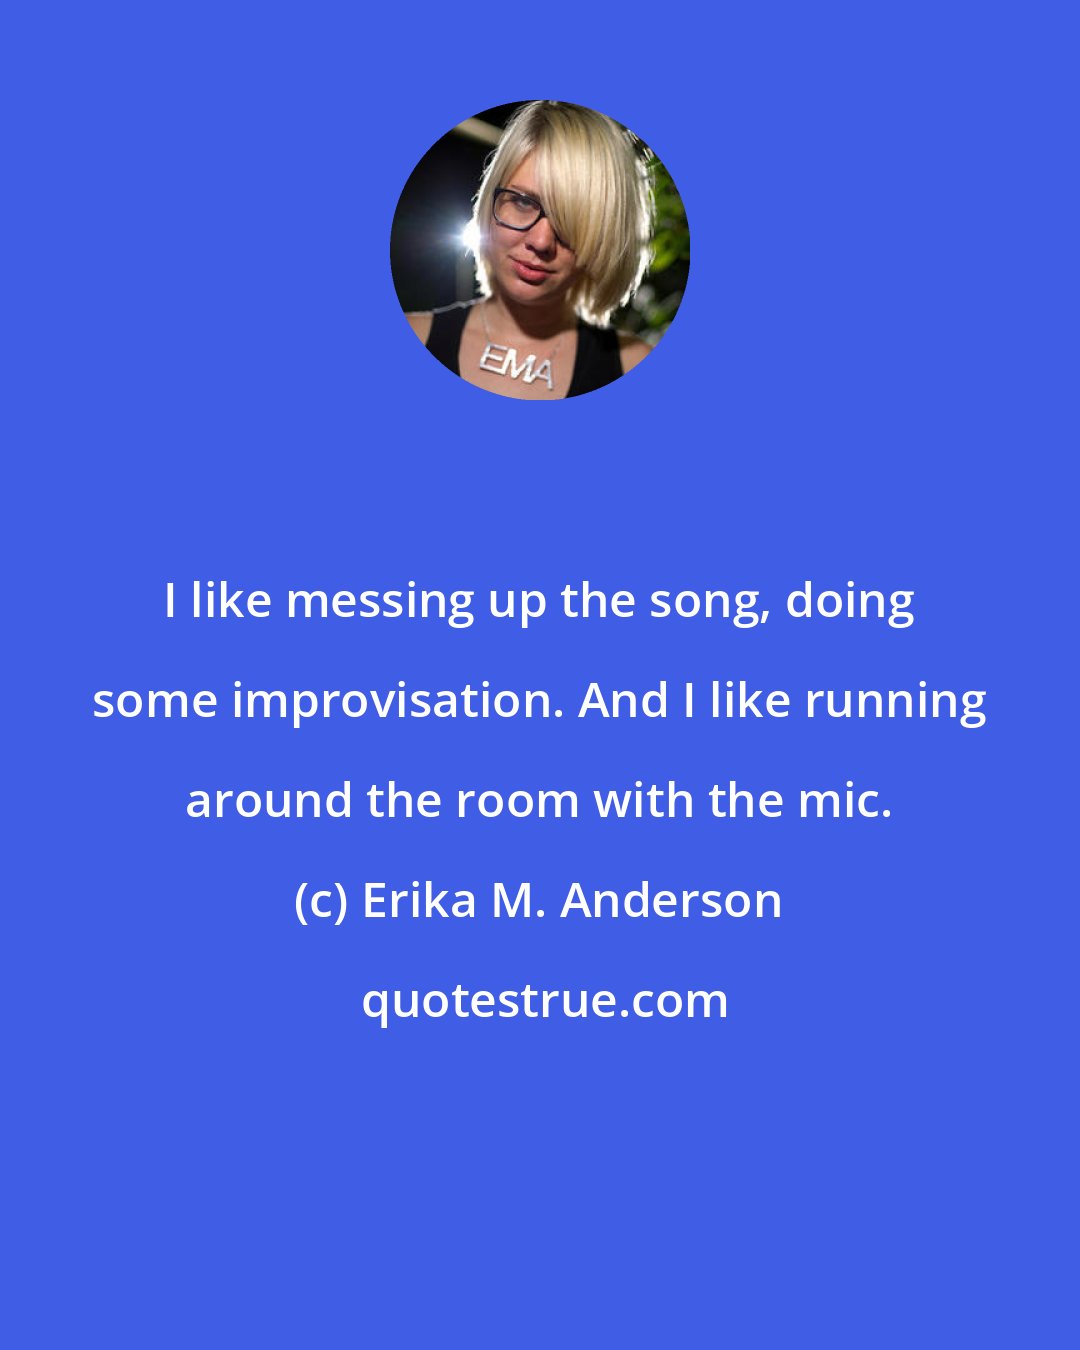 Erika M. Anderson: I like messing up the song, doing some improvisation. And I like running around the room with the mic.